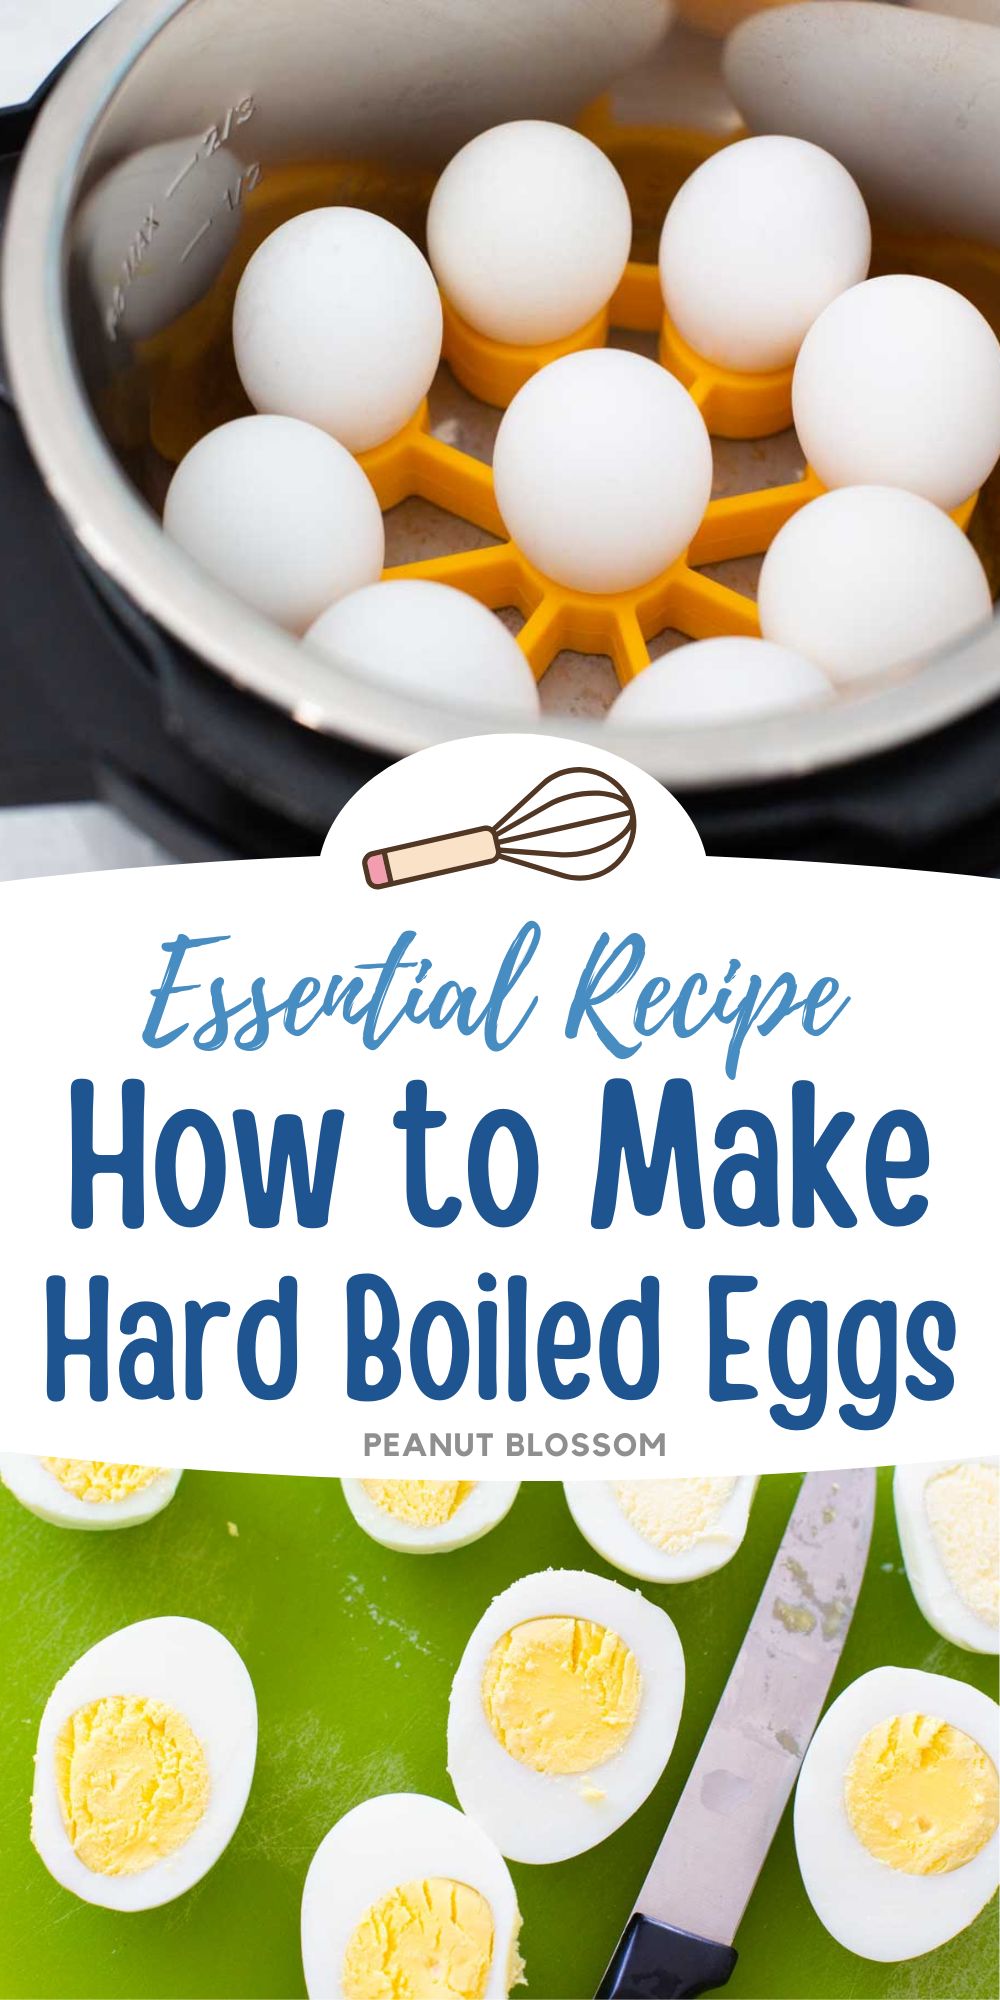 The photo collage shows eggs in an Instant Pot next to the hard boiled eggs cut open to show the yolks.